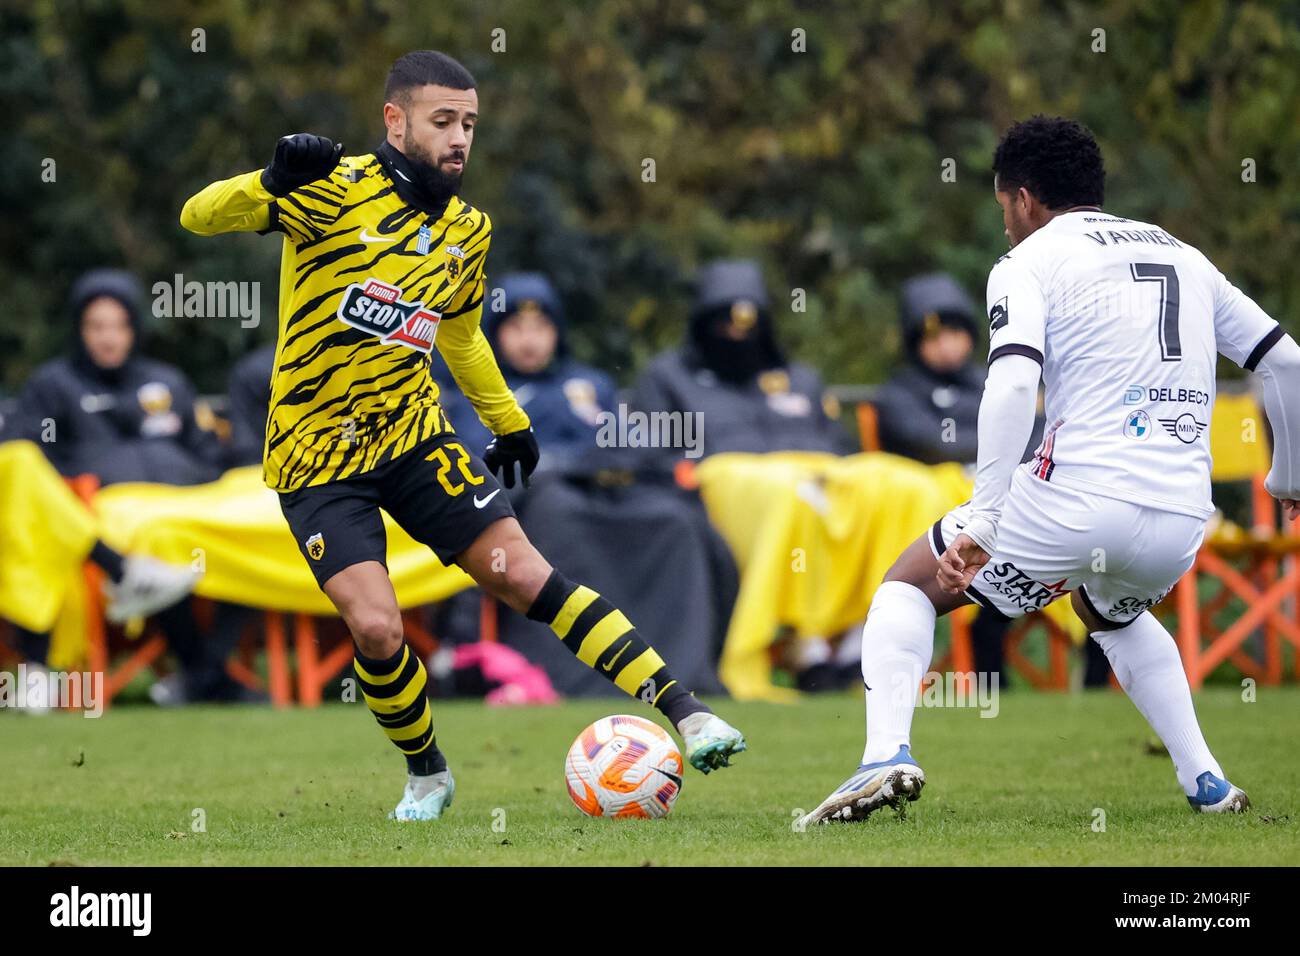 BURGH-HAAMSTEDE, NETHERLANDS - DECEMBER 4: Paolo Fernandes of AEK Athens dribbles with the ball during the Friendly match between AEK Athens and RFC Seraing at Sportpark van Zuijen on December 4, 2022 in Burgh-Haamstede, Netherlands (Photo by Broer van den Boom/Orange Pictures) Stock Photo